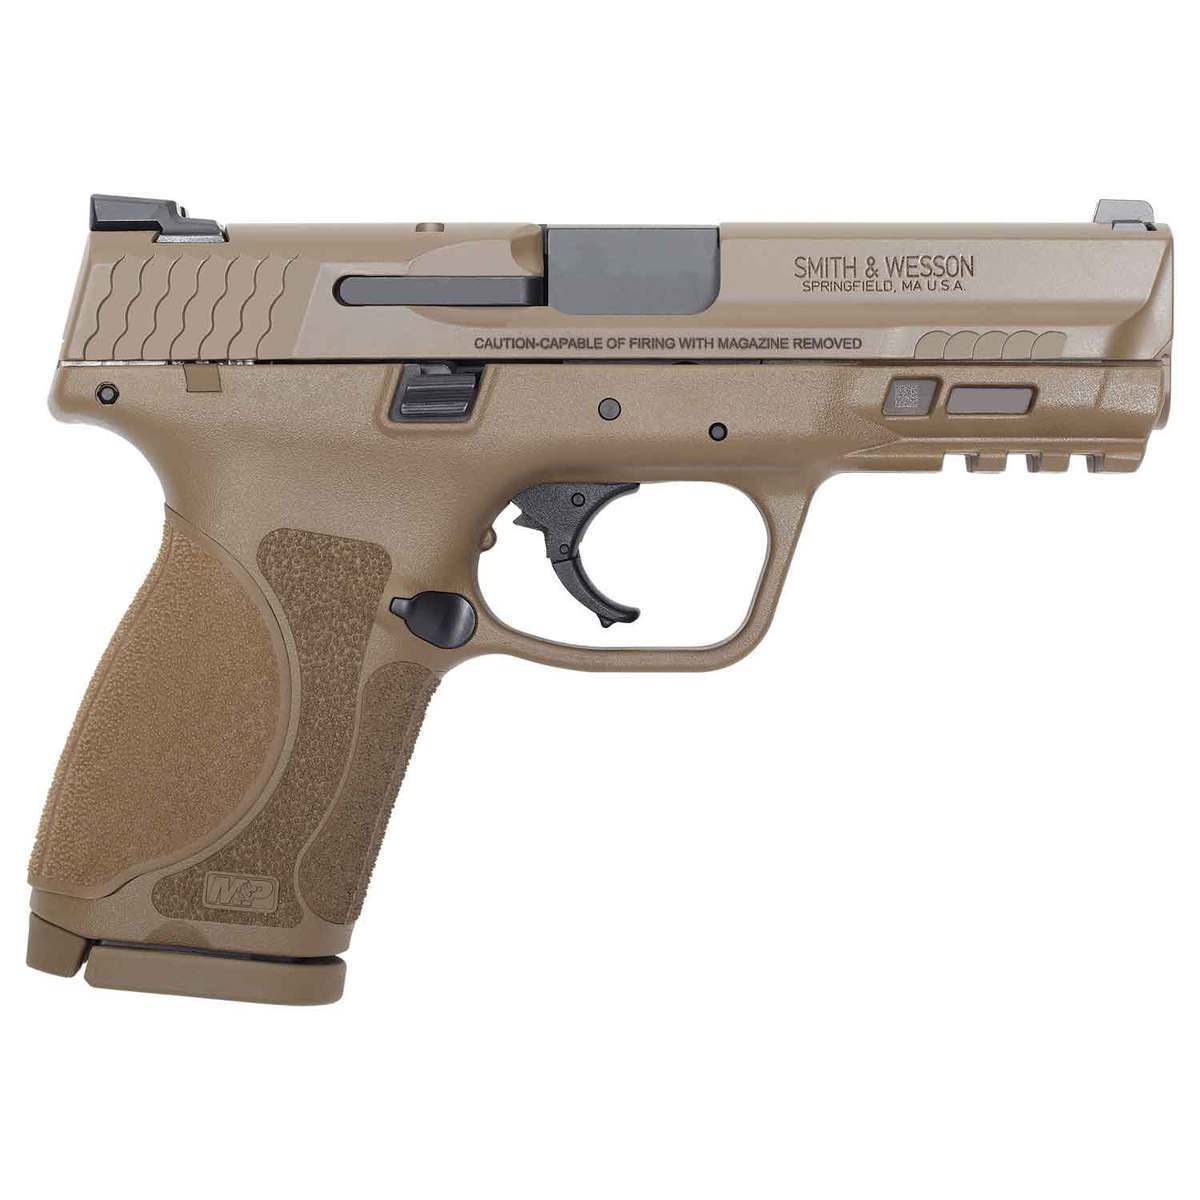 Smith And Wesson Mandp 9 M20 Compact 9mm Luger 4in Fde Pistol 151 Rounds Tan Sportsmans 8891